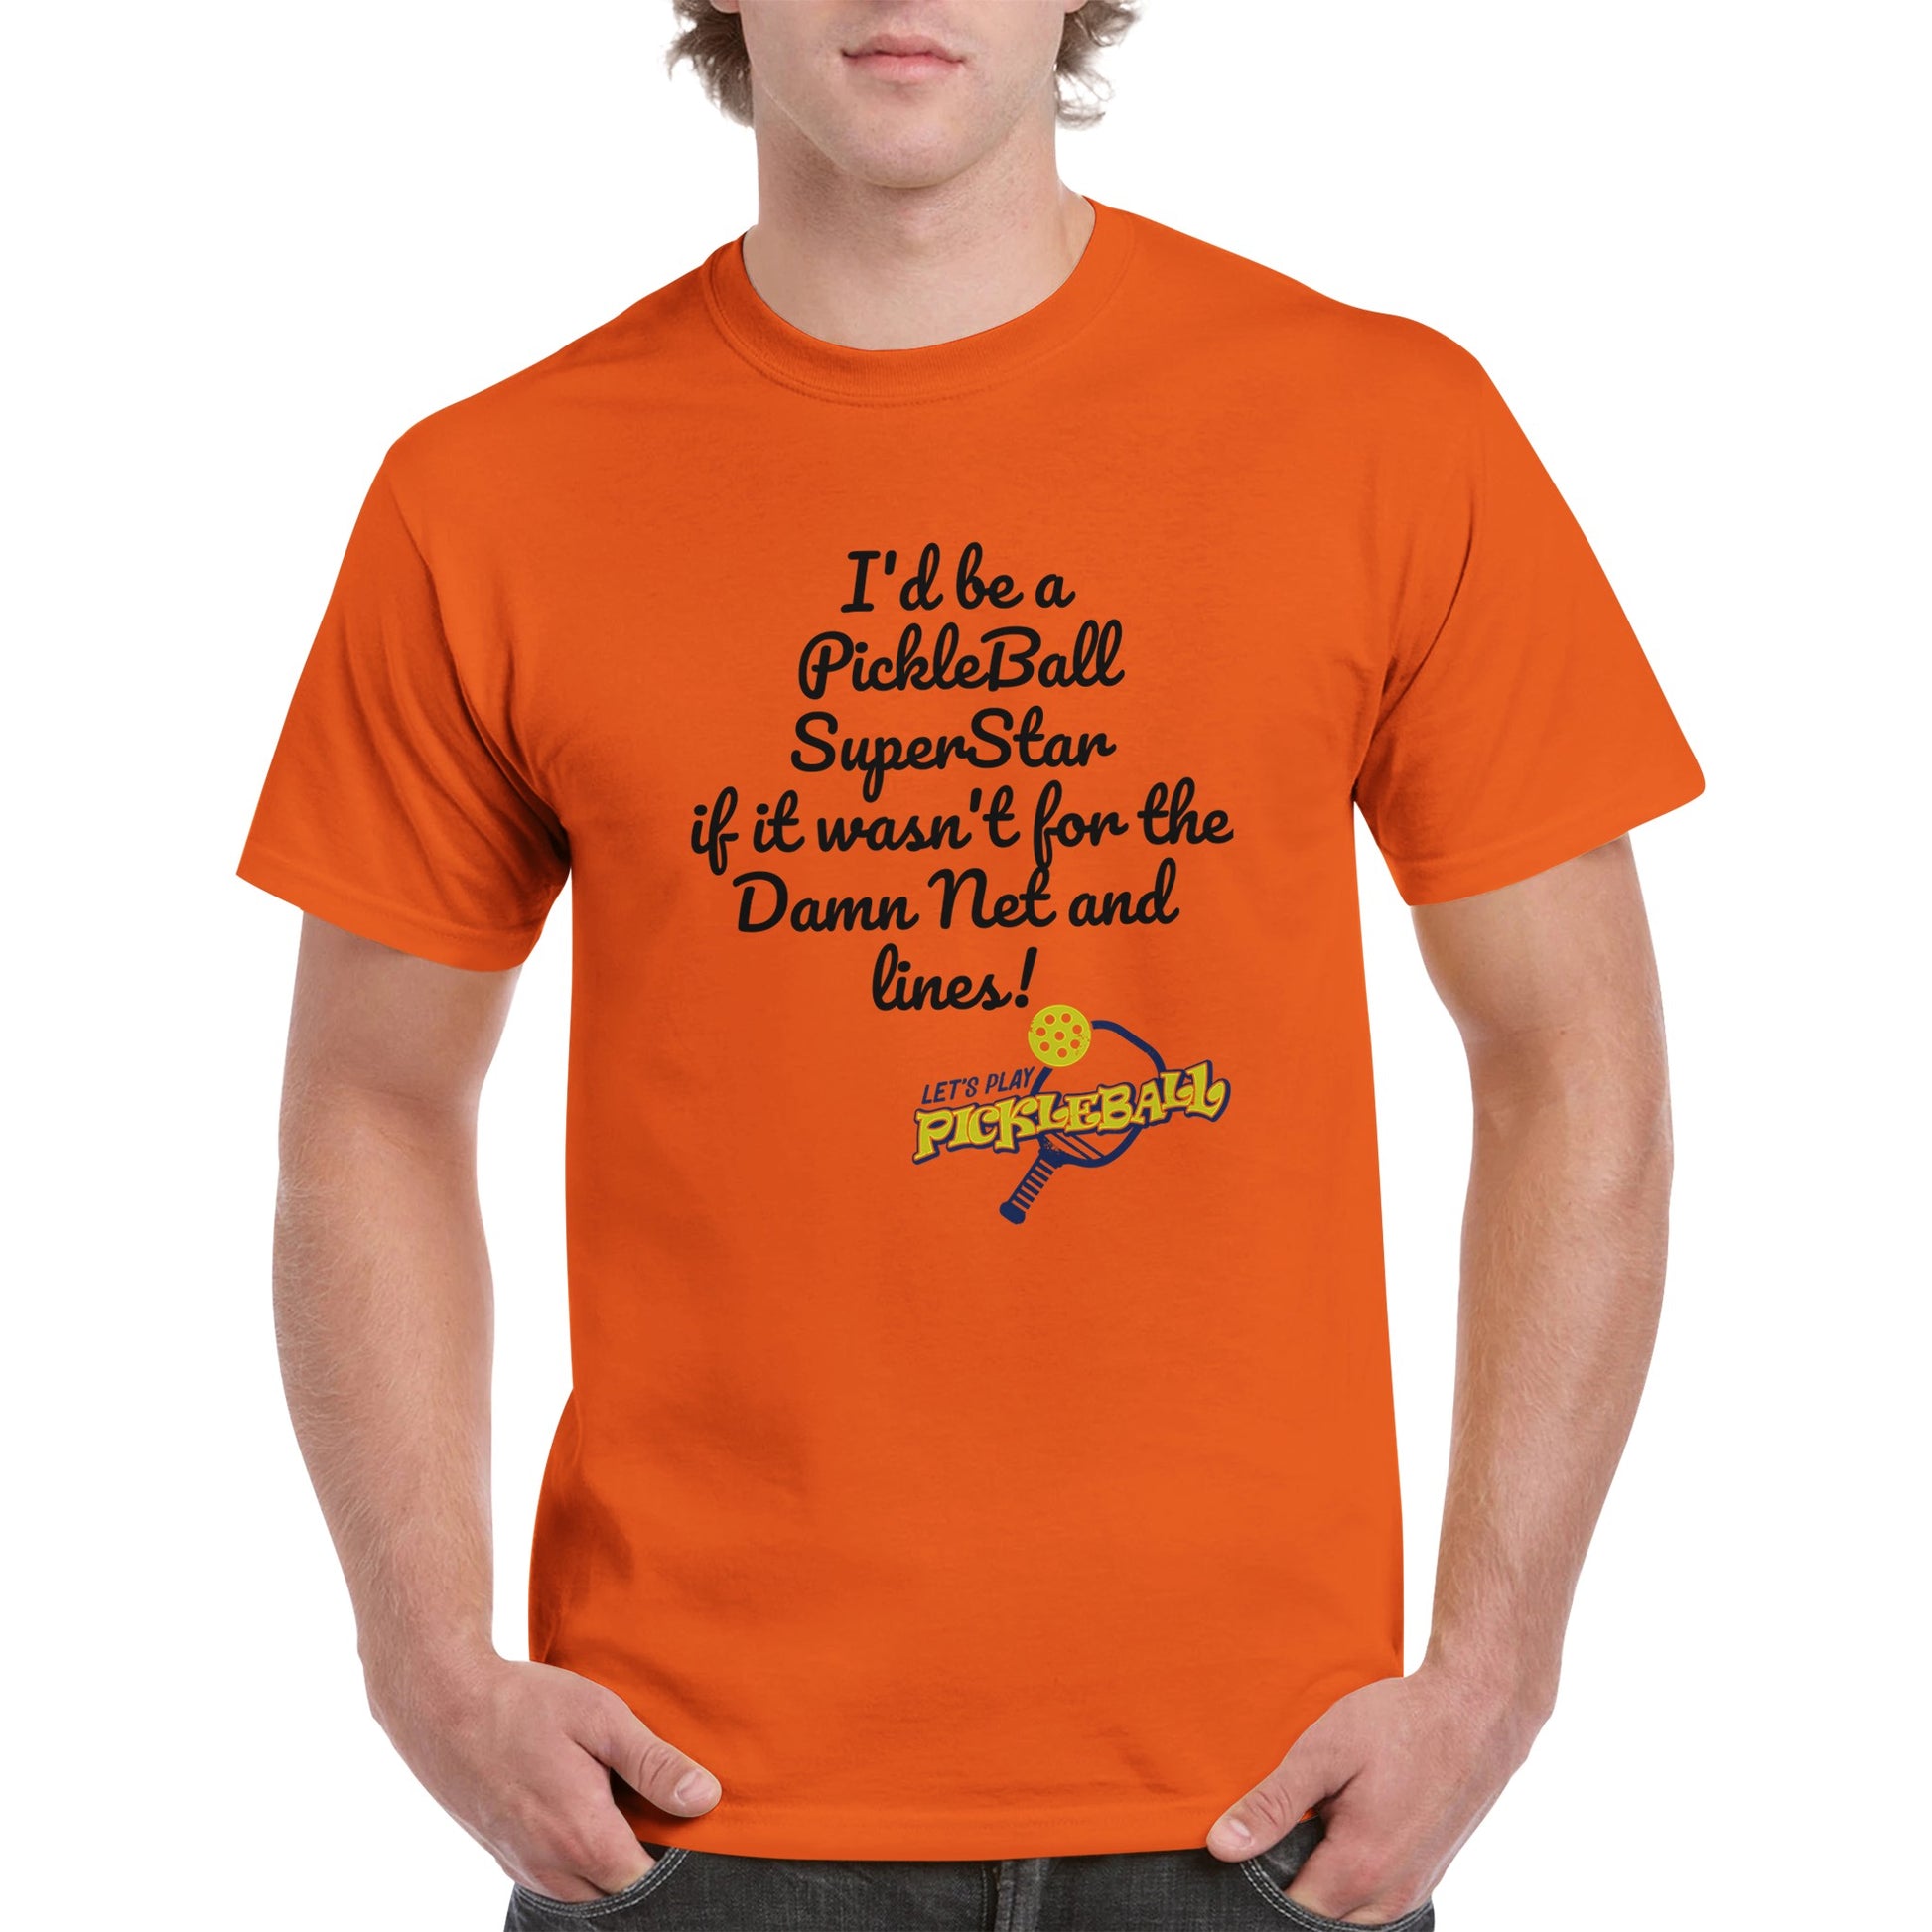 Orange comfortable Unisex Crewneck heavyweight cotton t-shirt with funny saying I’d be a PickleBall SuperStar if it wasn’t for the Damn Net and Lines and Let’s Play Pickleball logo on the front from WhatYa Say Apparel worn by blonde-haired male front view.